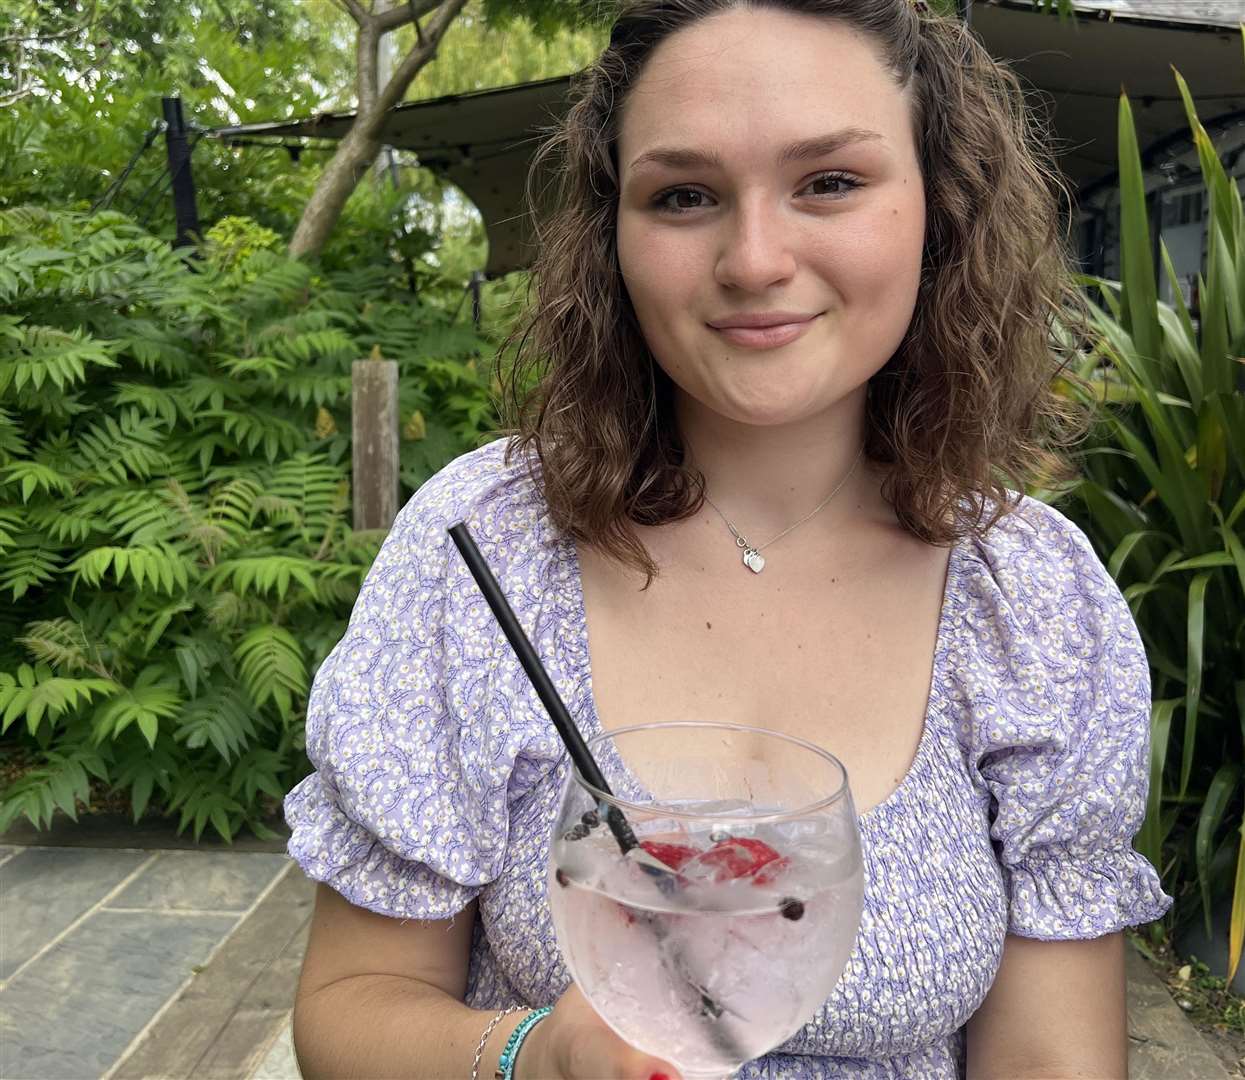 Reporter Megan Carr usually goes for a fruity Gin or cocktail on a night out